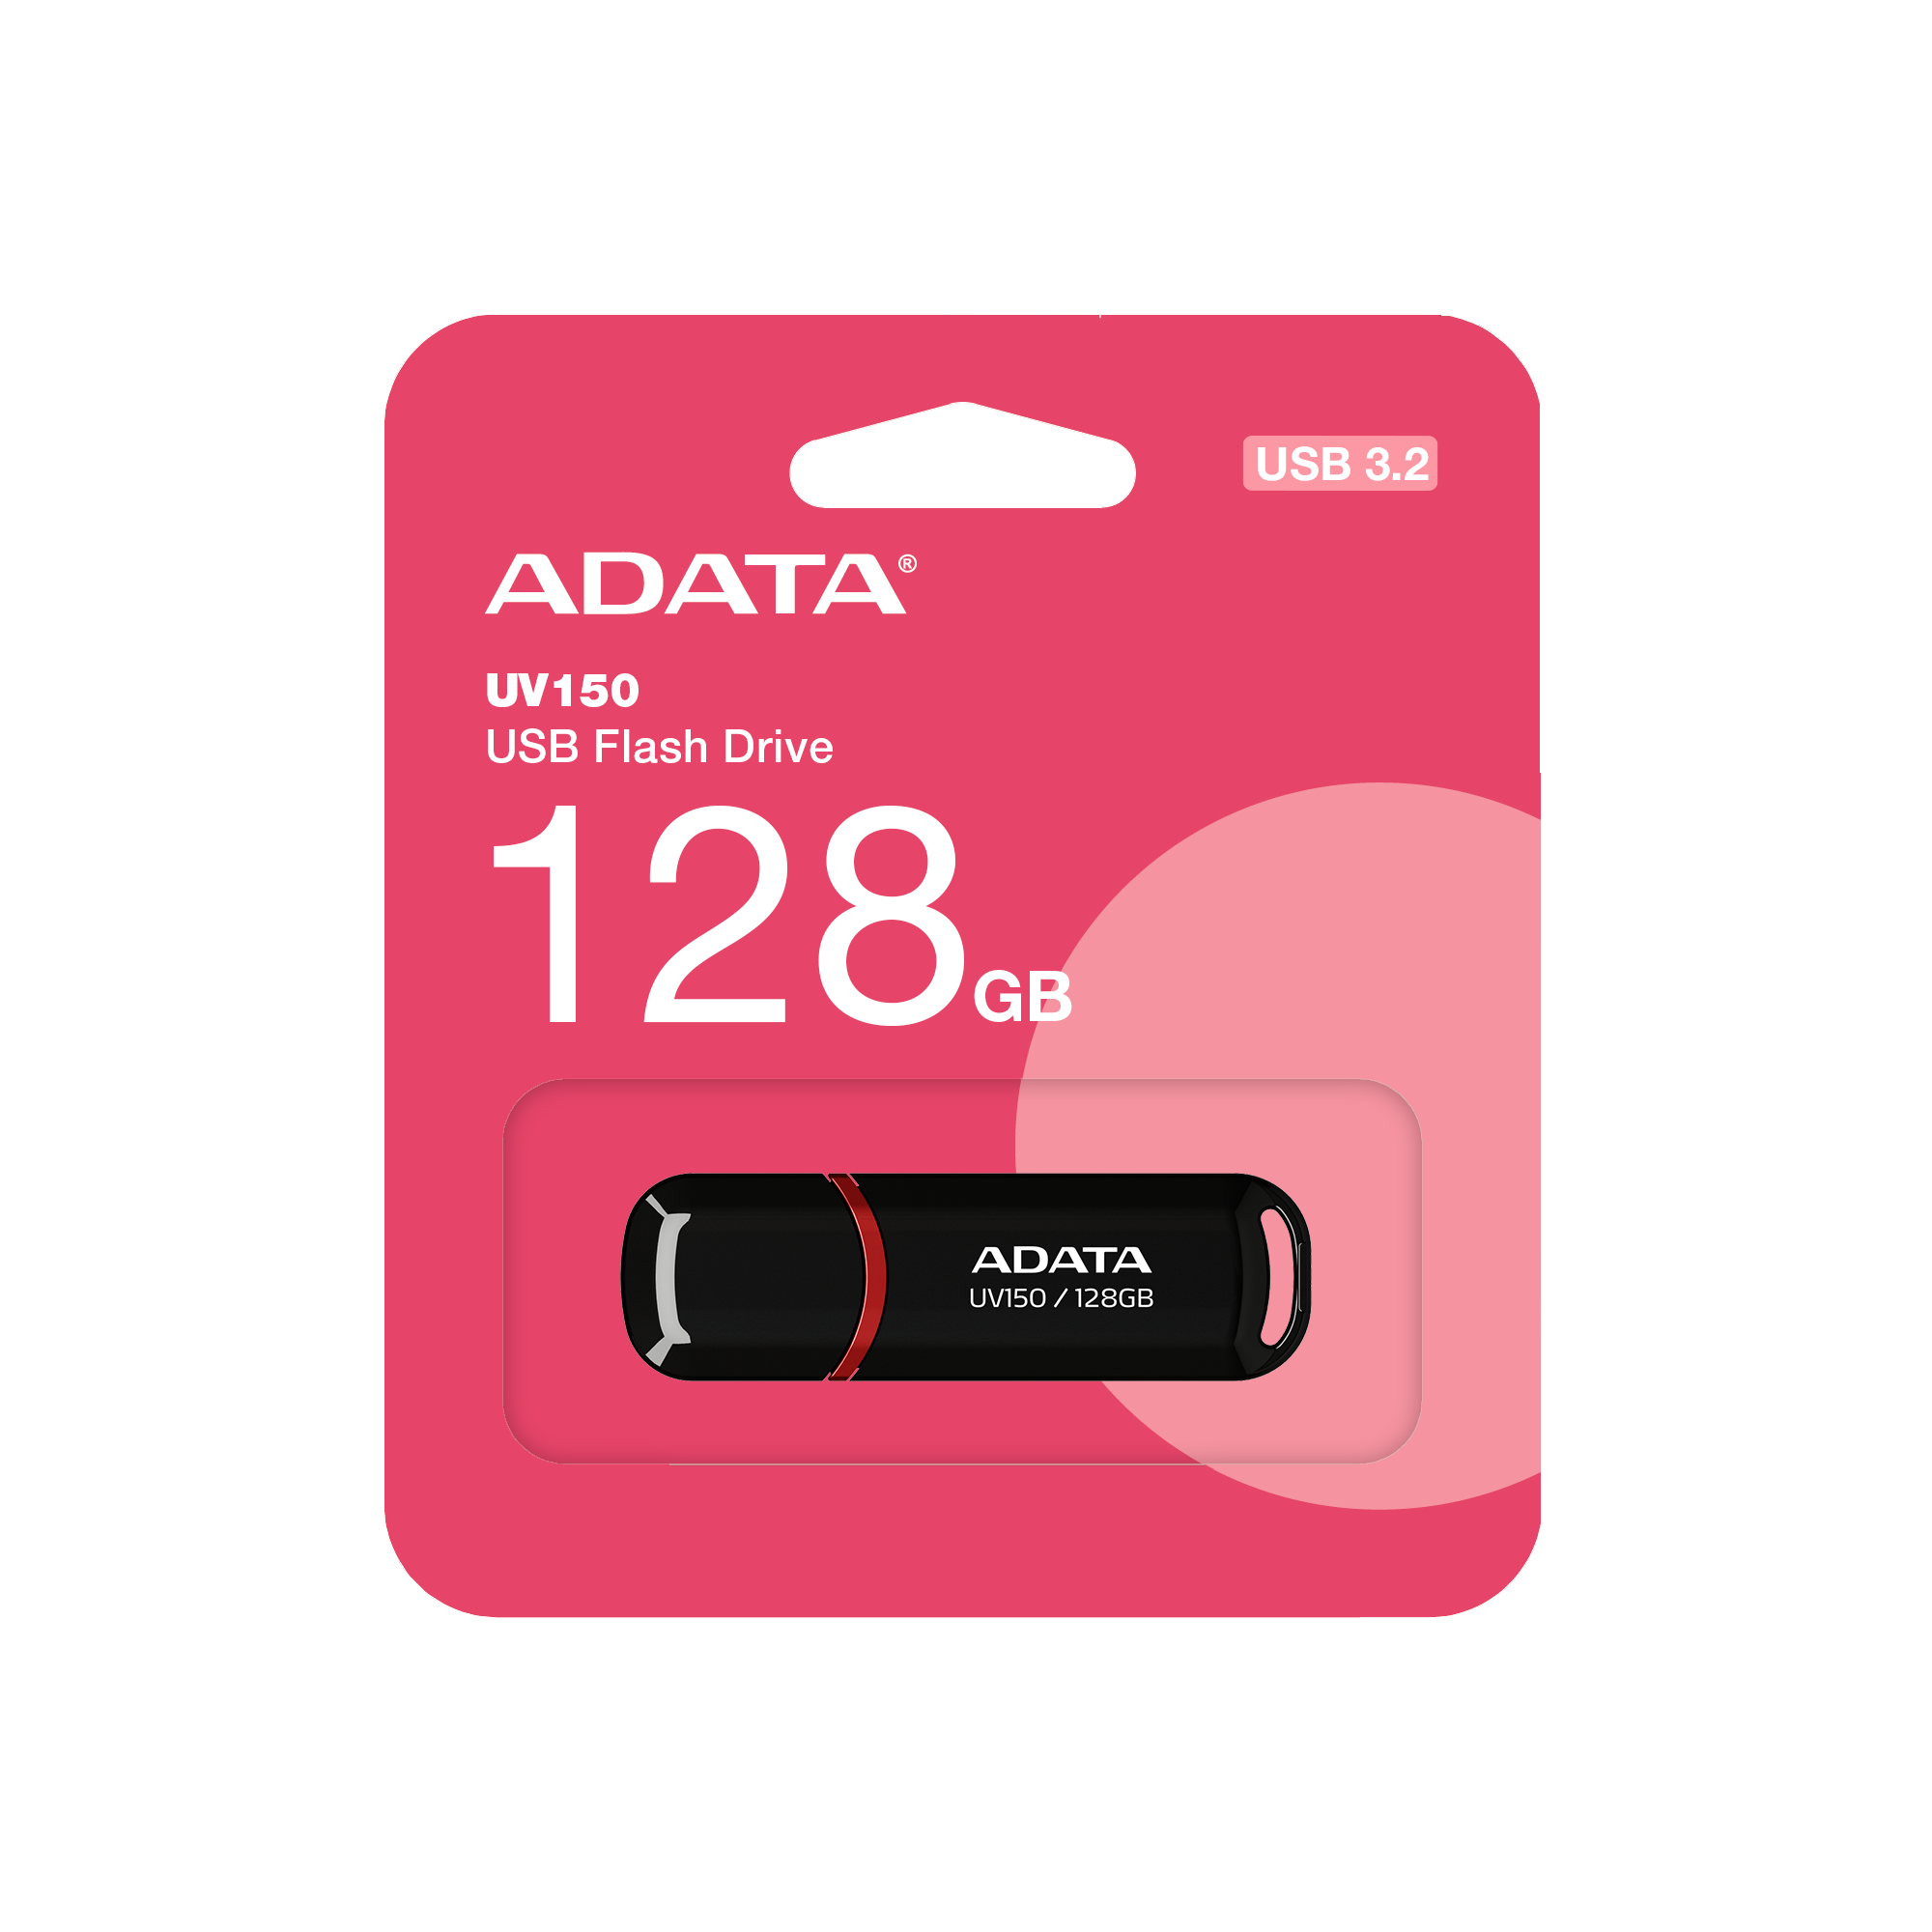 ADATA UV150 Pendrive (64GB | USB 3.2 | Read up to 100MB/s | Compact Size)ADATA UV150 Pendrive (64GB | USB 3.2 | Read up to 100MB/s | Compact Size)